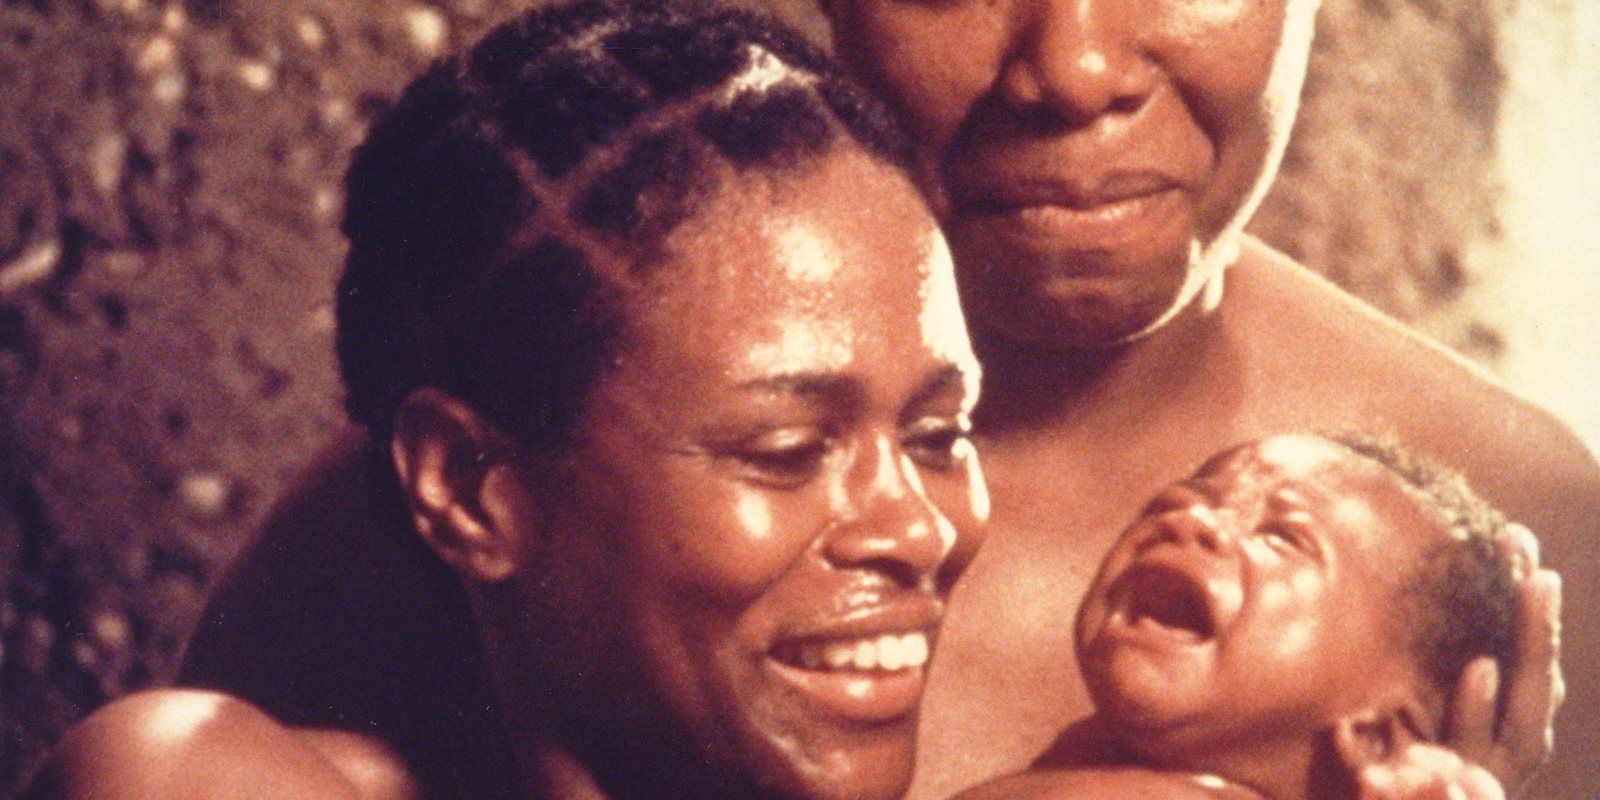 Roots poster mother baby